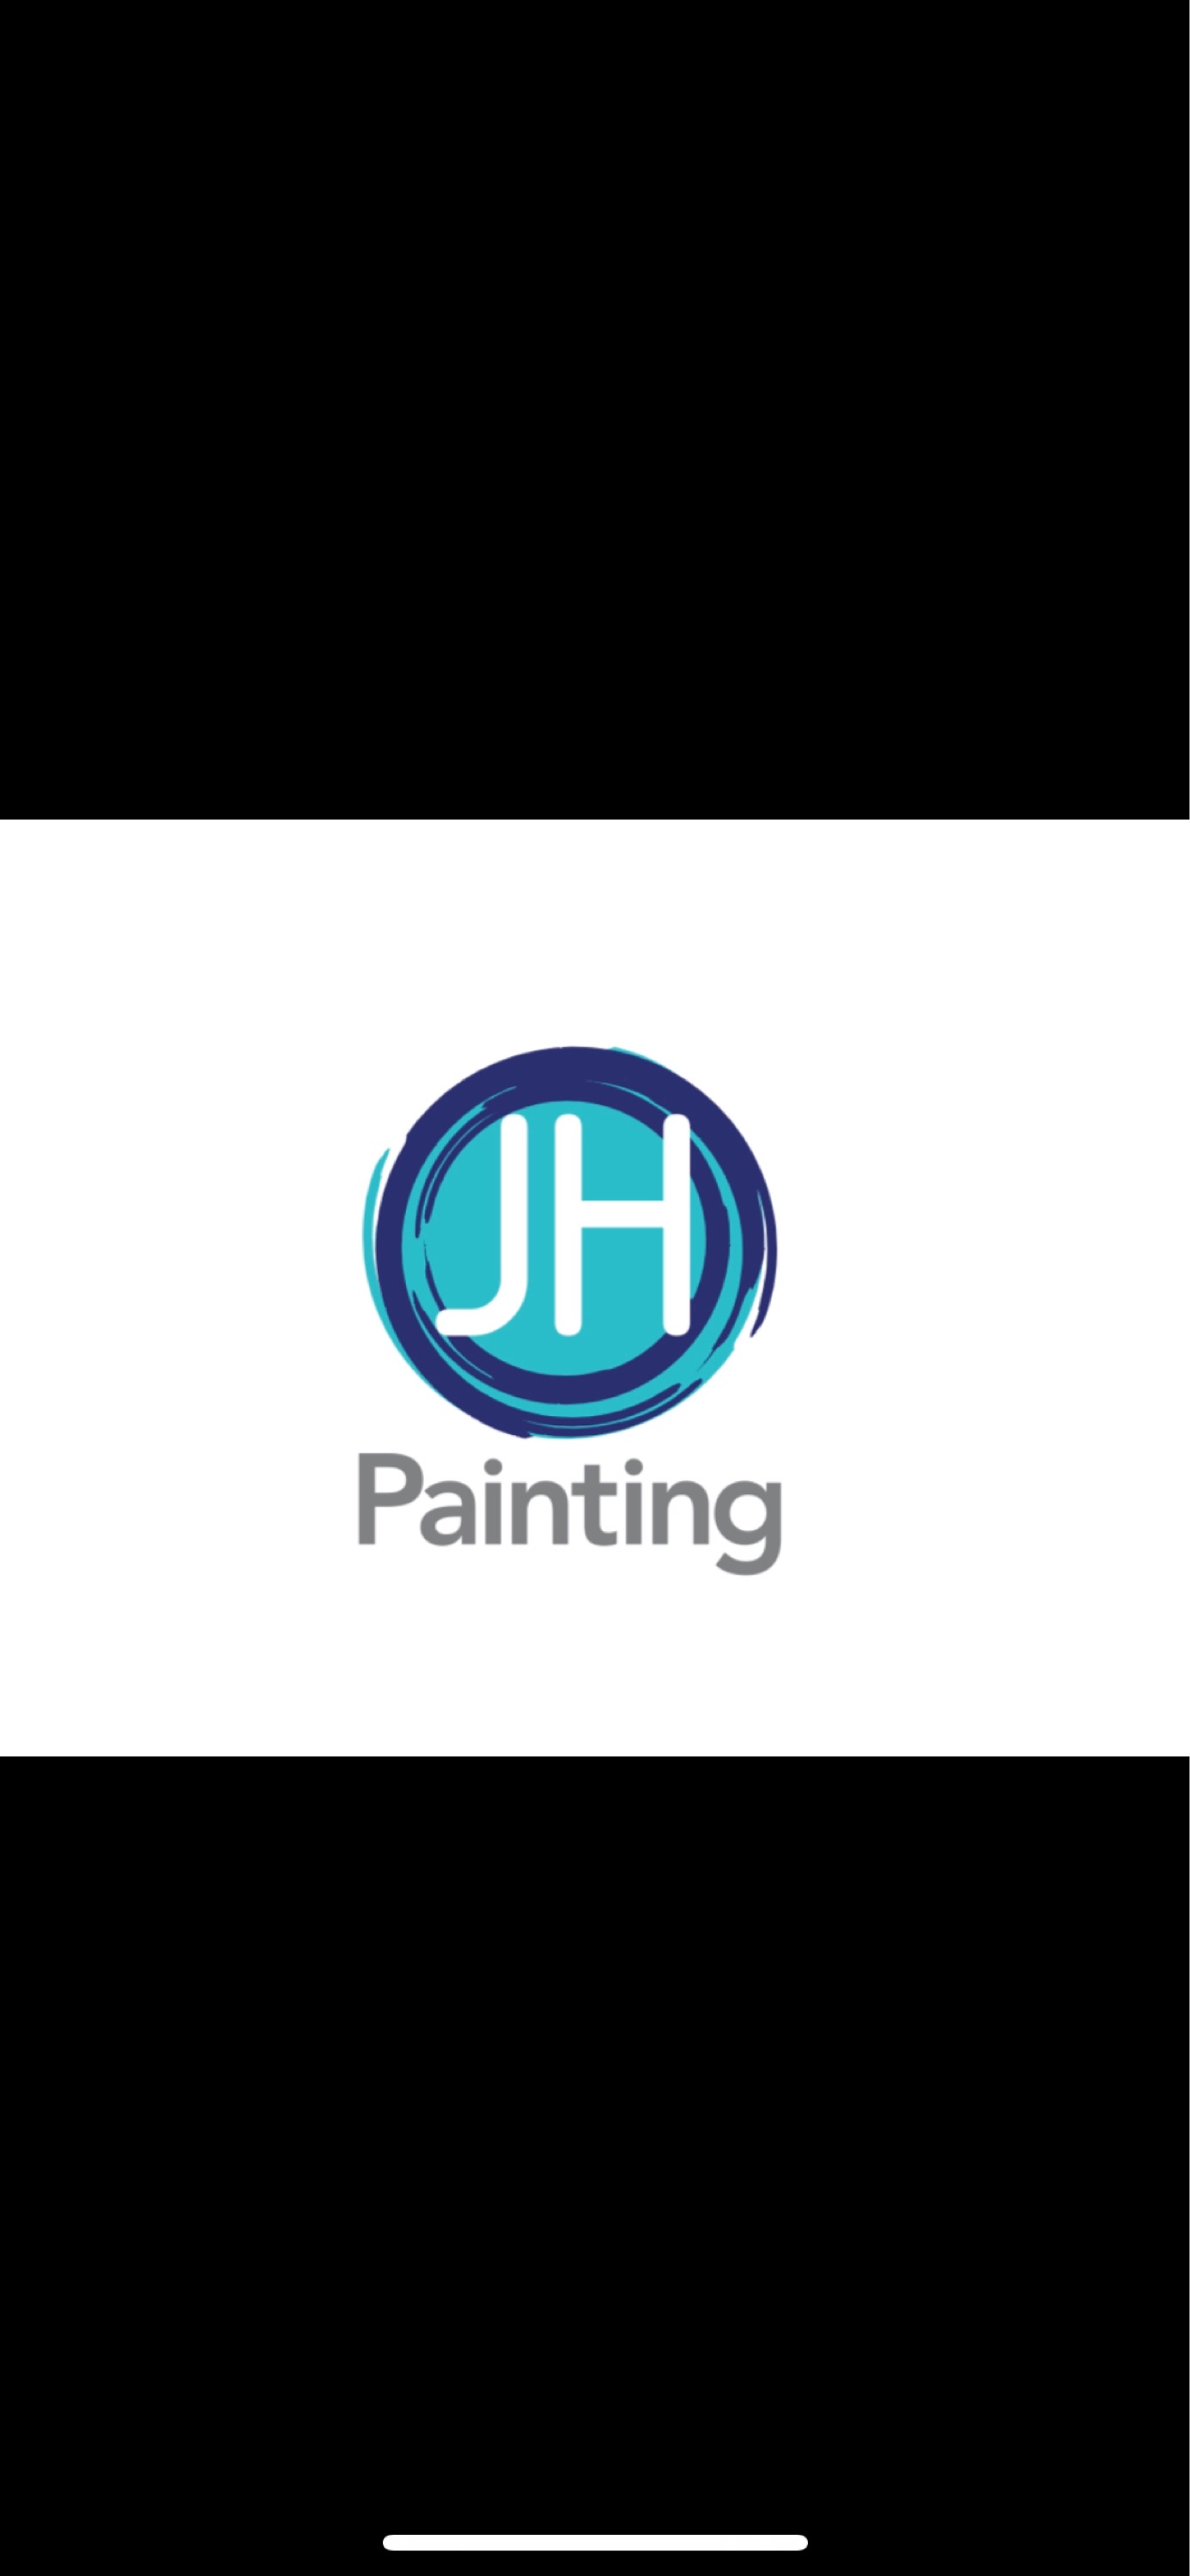 J & H Painting Services Logo